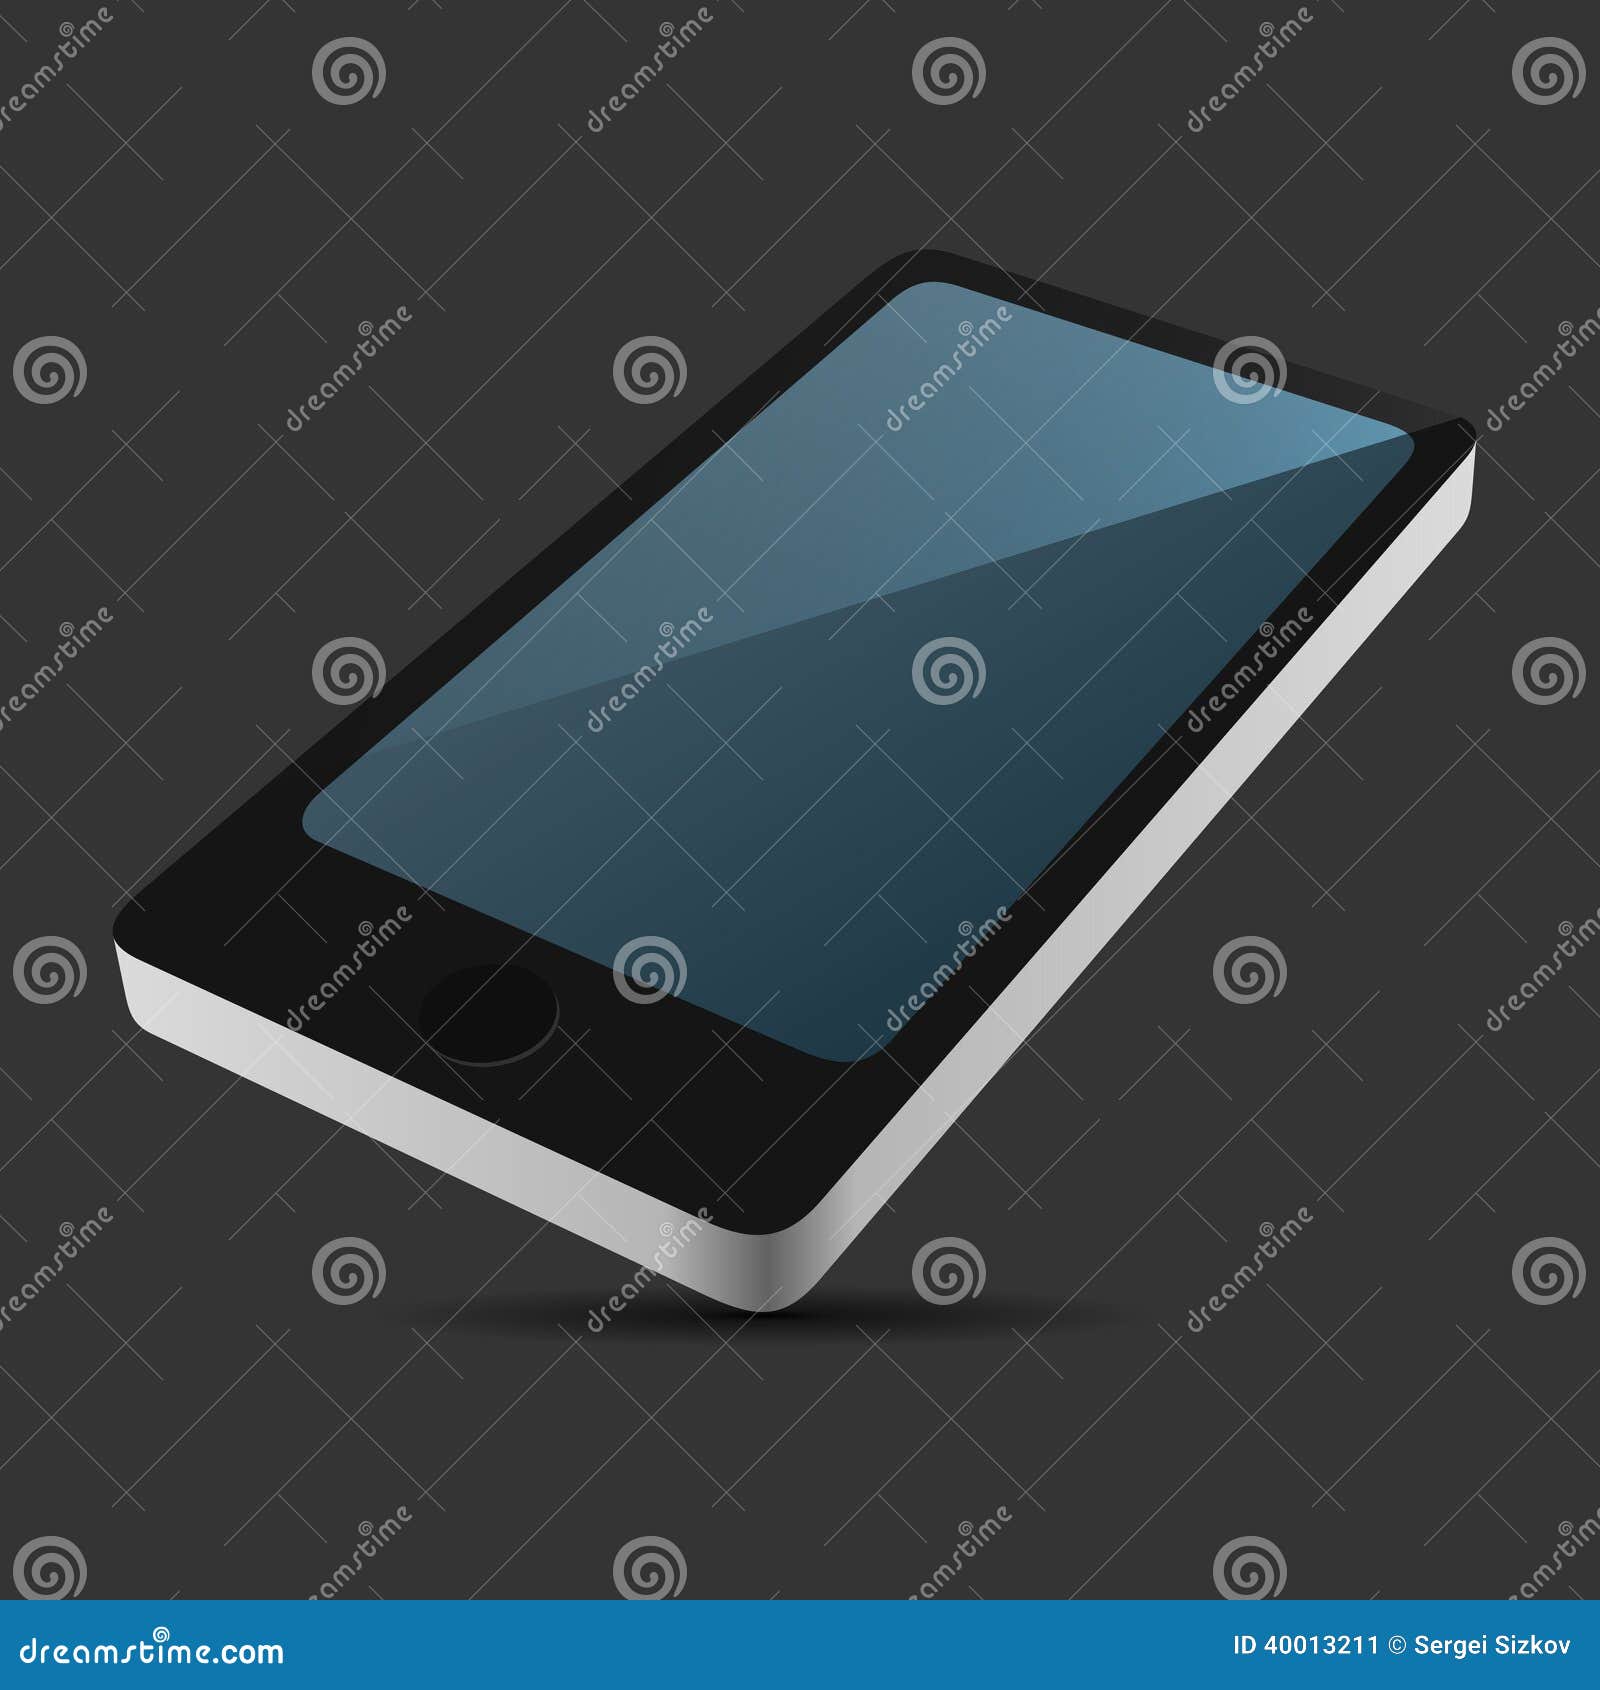 Download Smartphone 3D View Icon In Flat Style On Dark Background ...